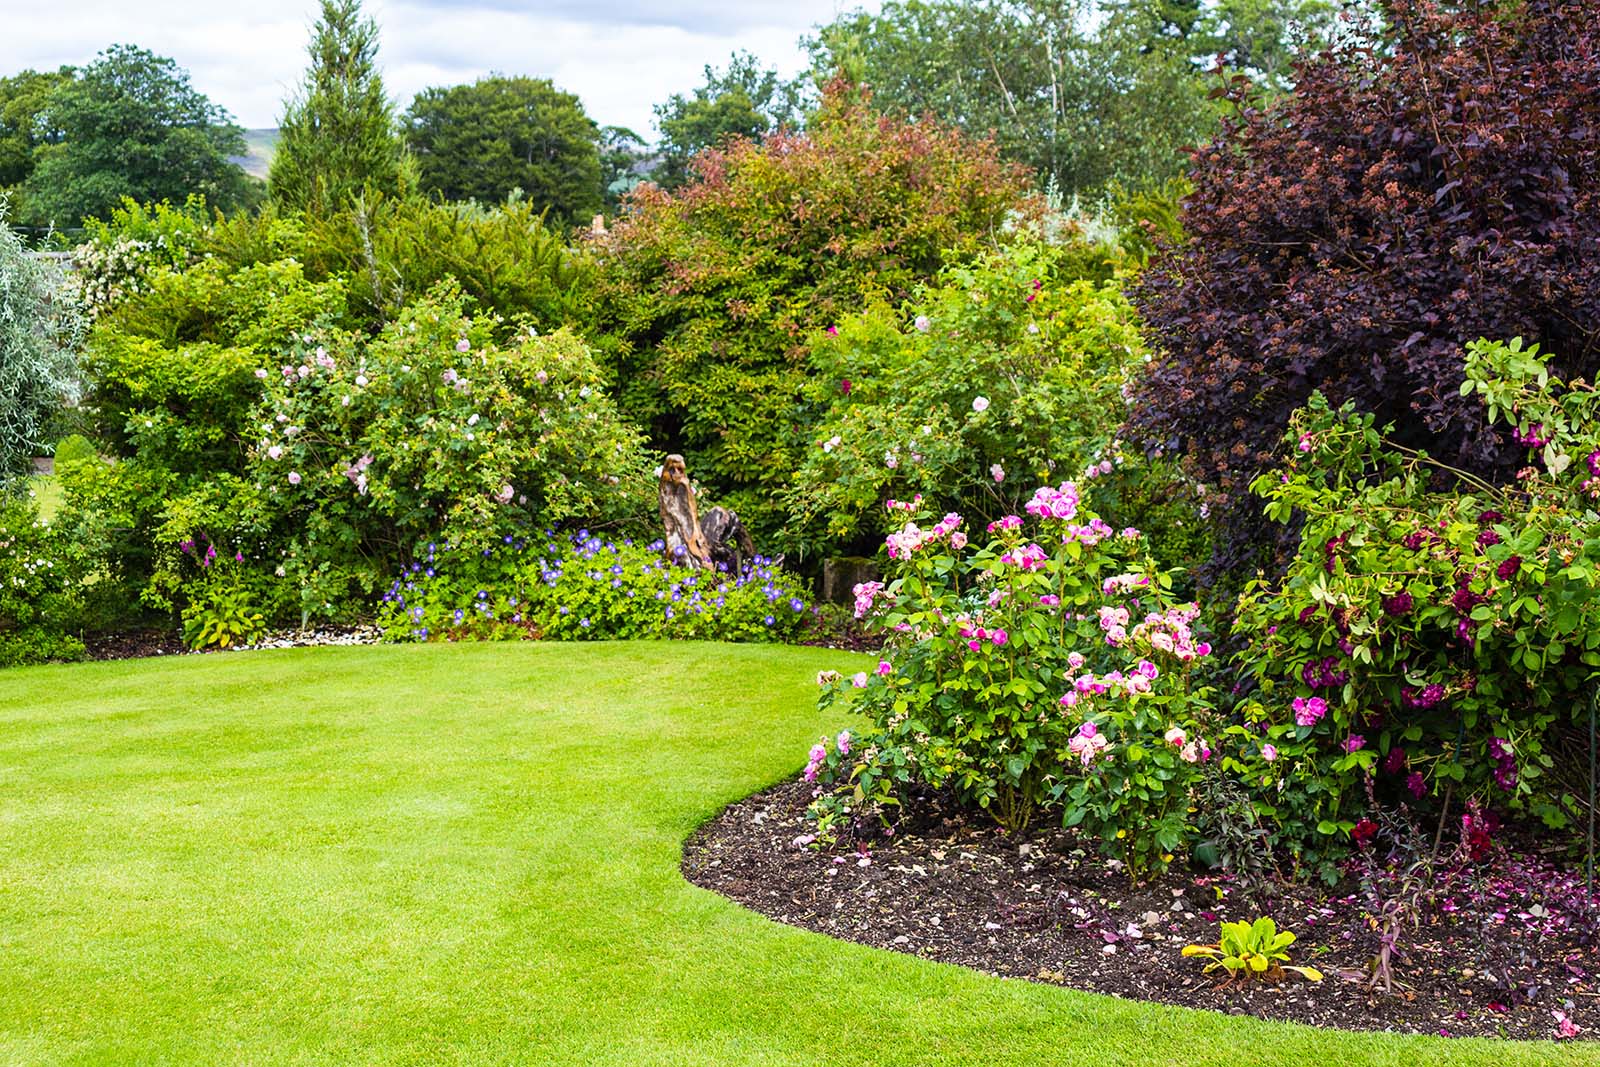 How to Make Your Lawn Thicker and Greener